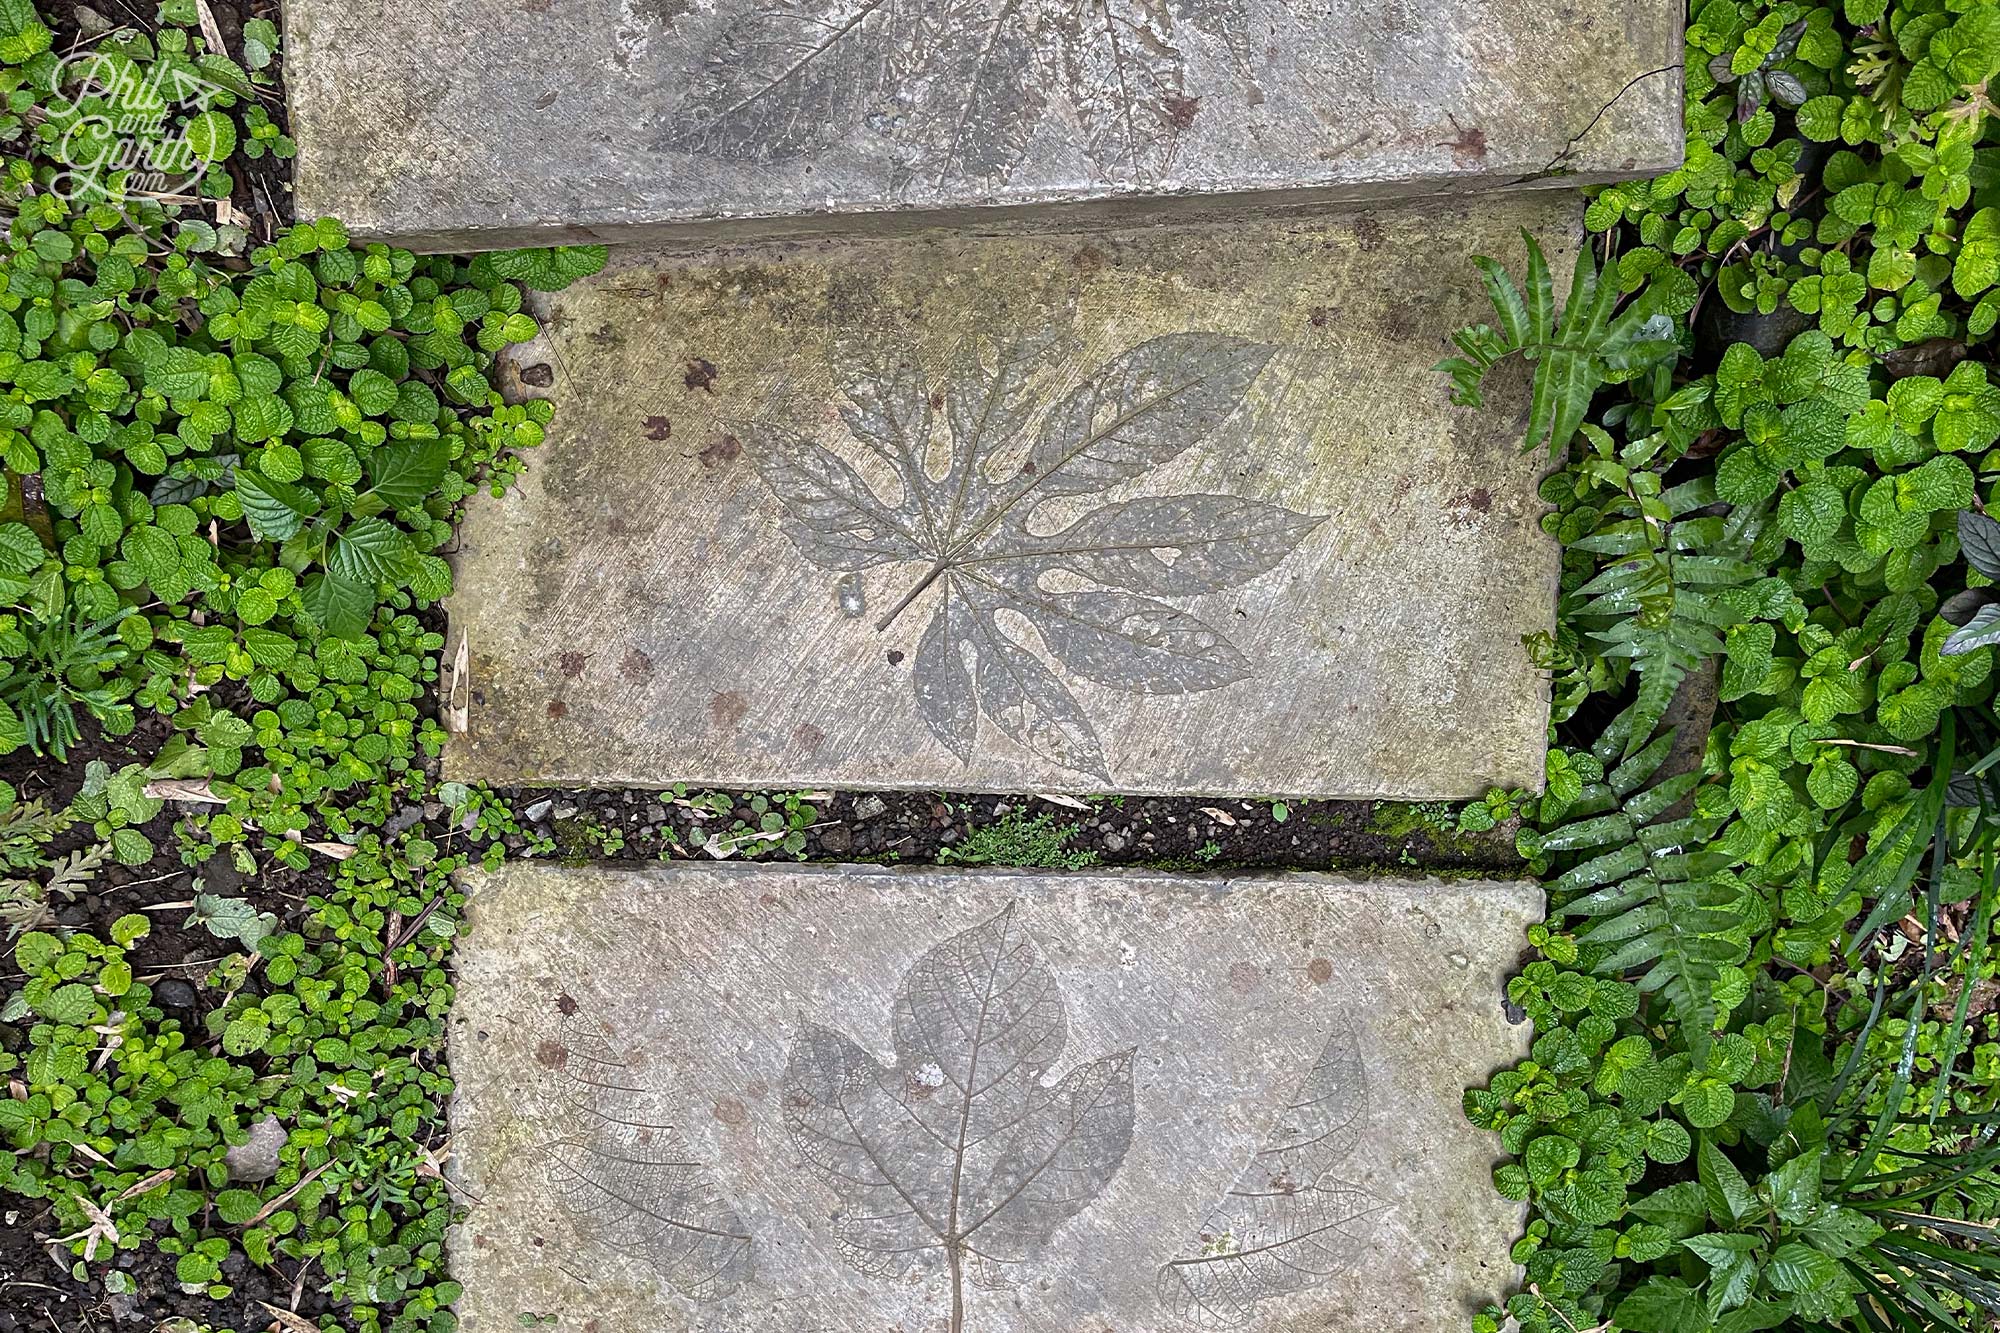 These concrete leaf imprints on the steps are a lovely detail